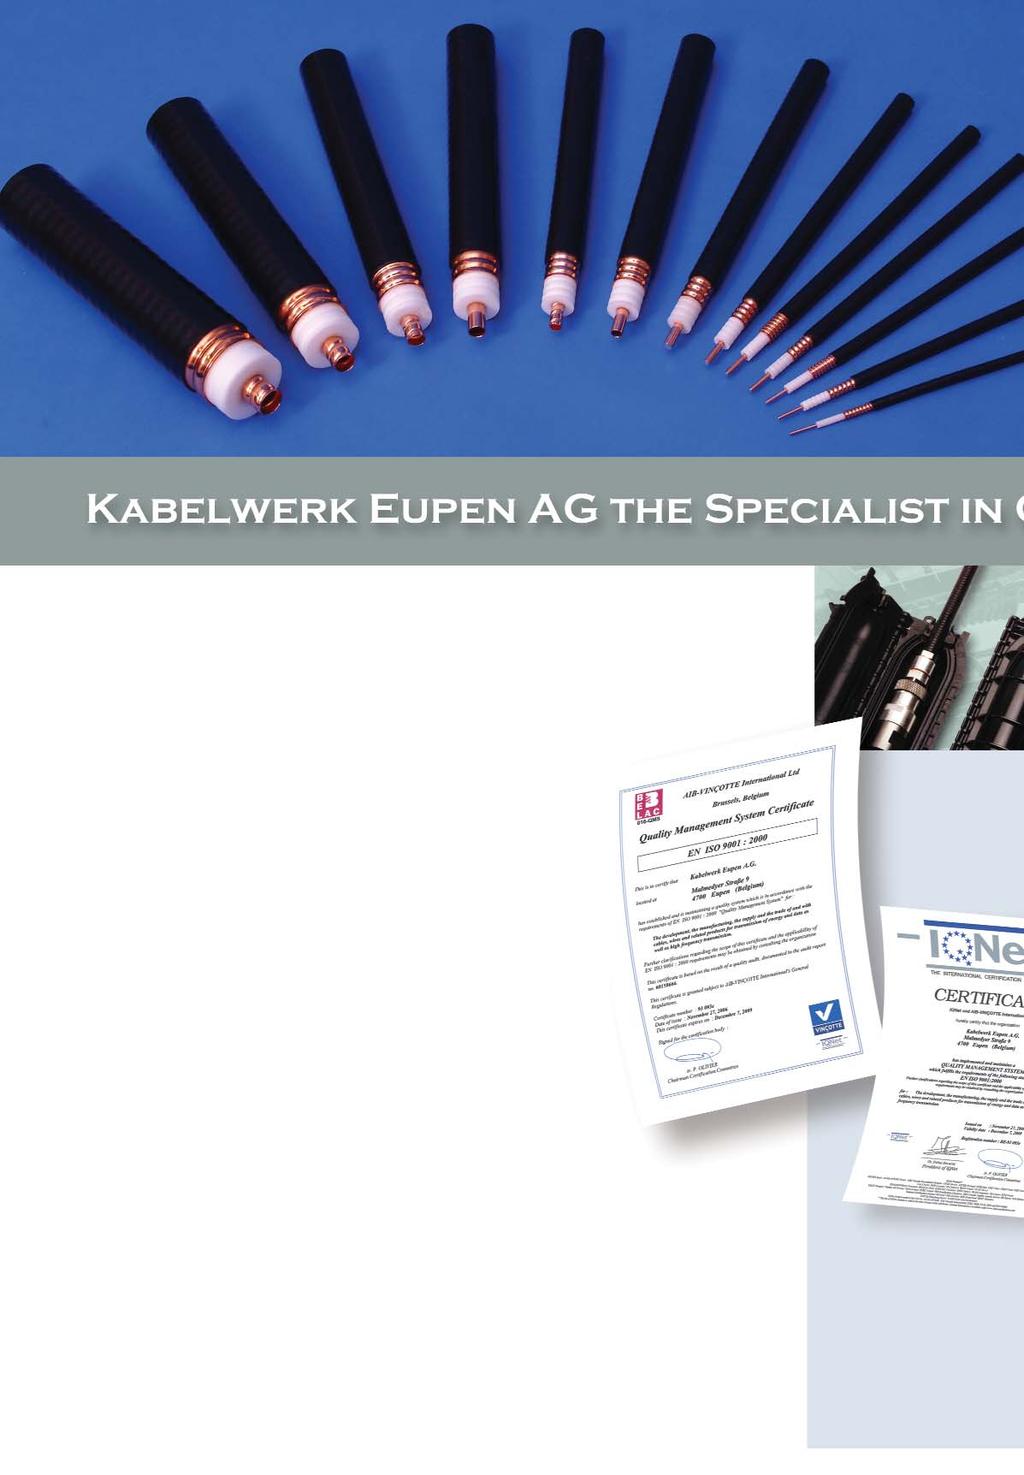 The foundation of the cable factory KABELWERK EUPEN AG as manufacturer of electrical cables goes back to the beginning of this century.